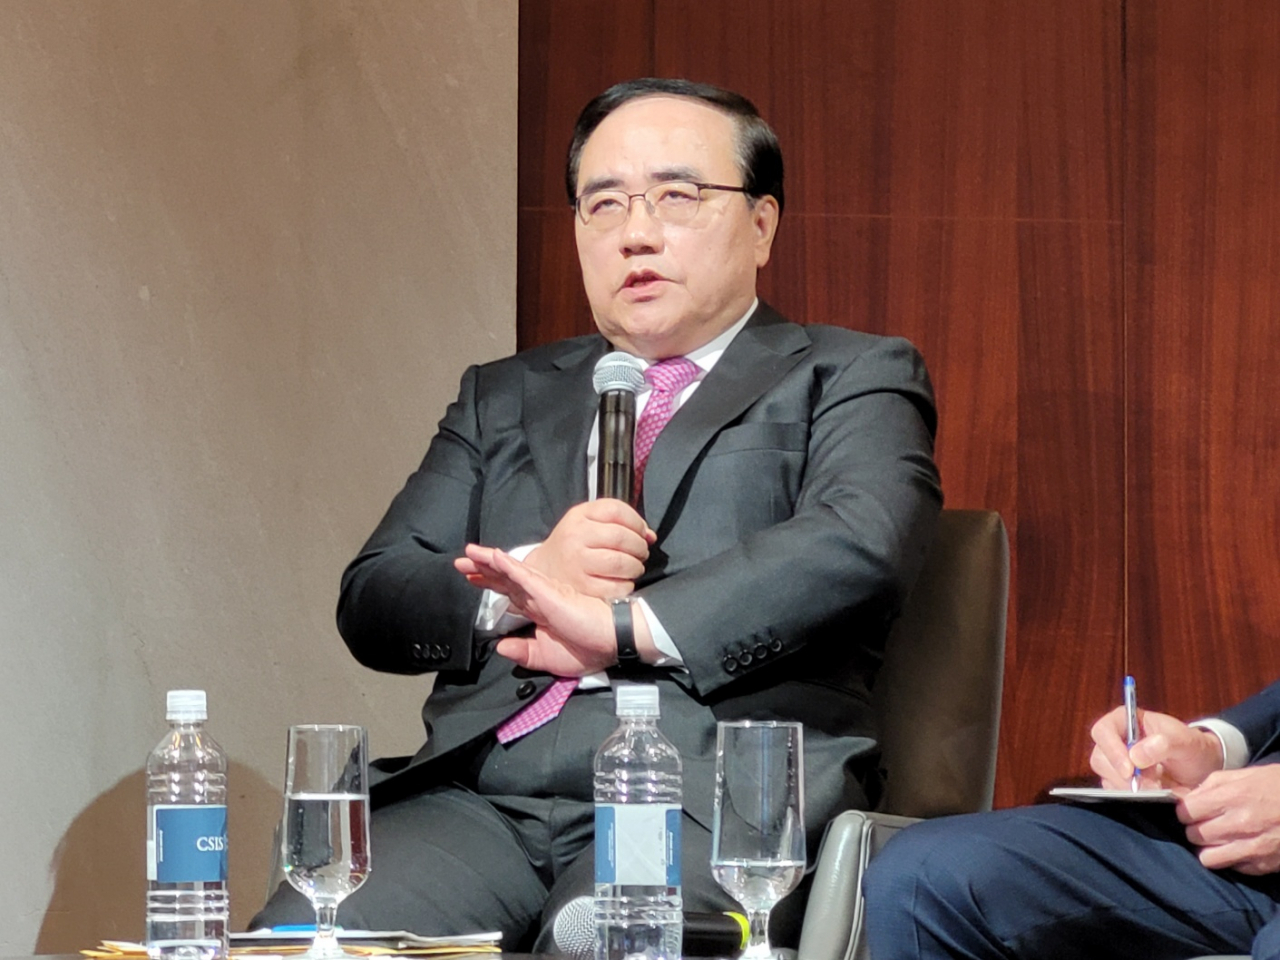 Former South Korean National Security Advisor Kim Sung-han speaks during a forum co-hosted by the Center for Strategic and International Studies and the Korea Foundation, in Washington, Monday. (Yonhap)